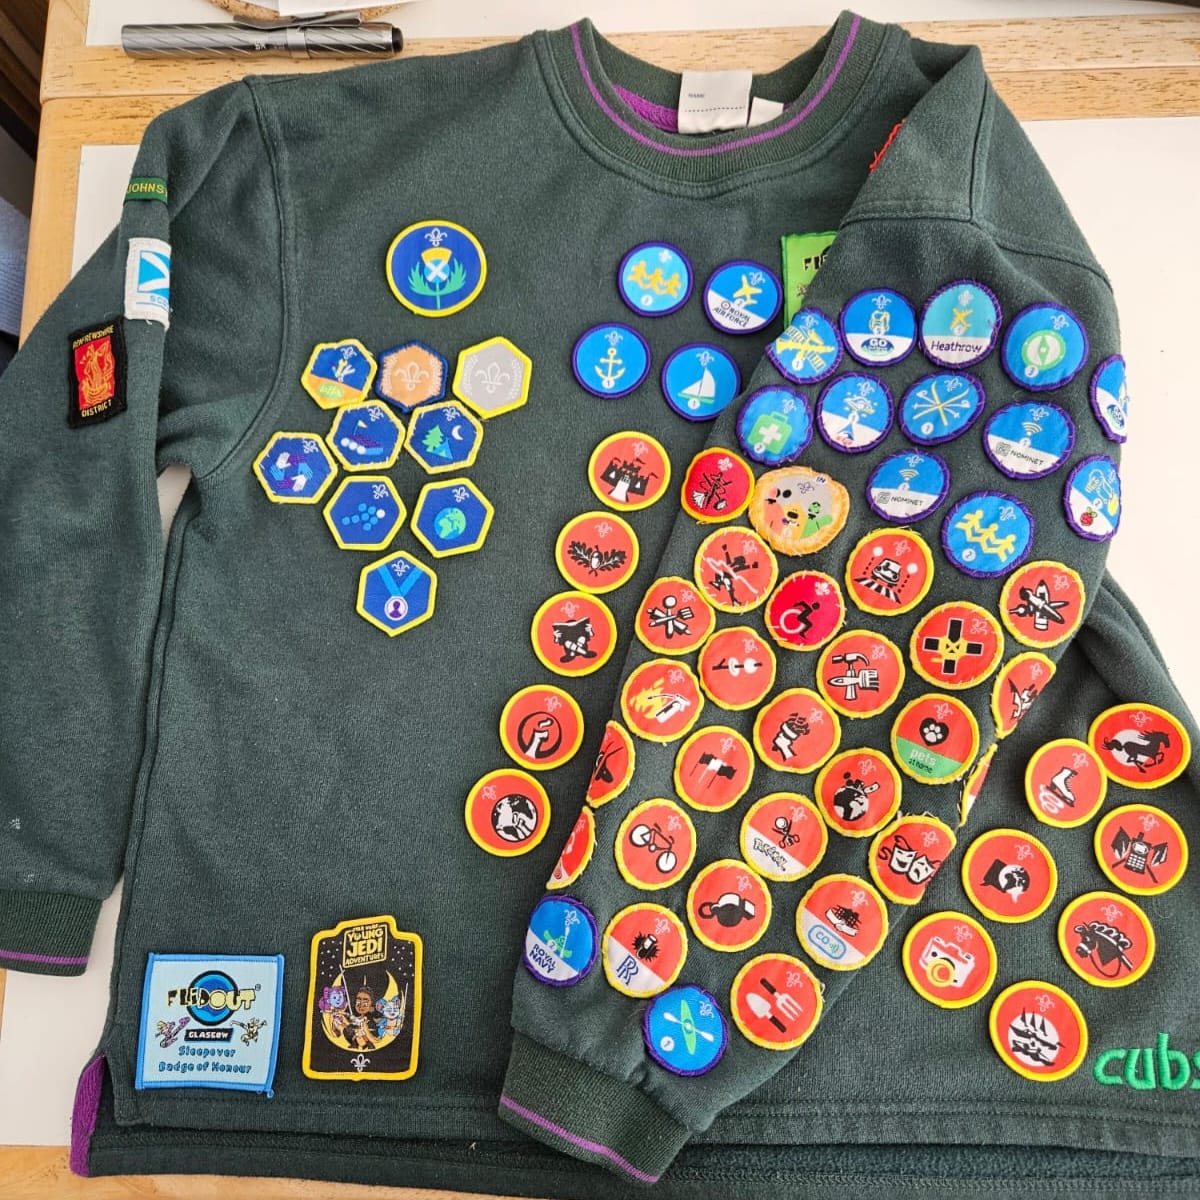 Kyle's Cubs jumper and his badges